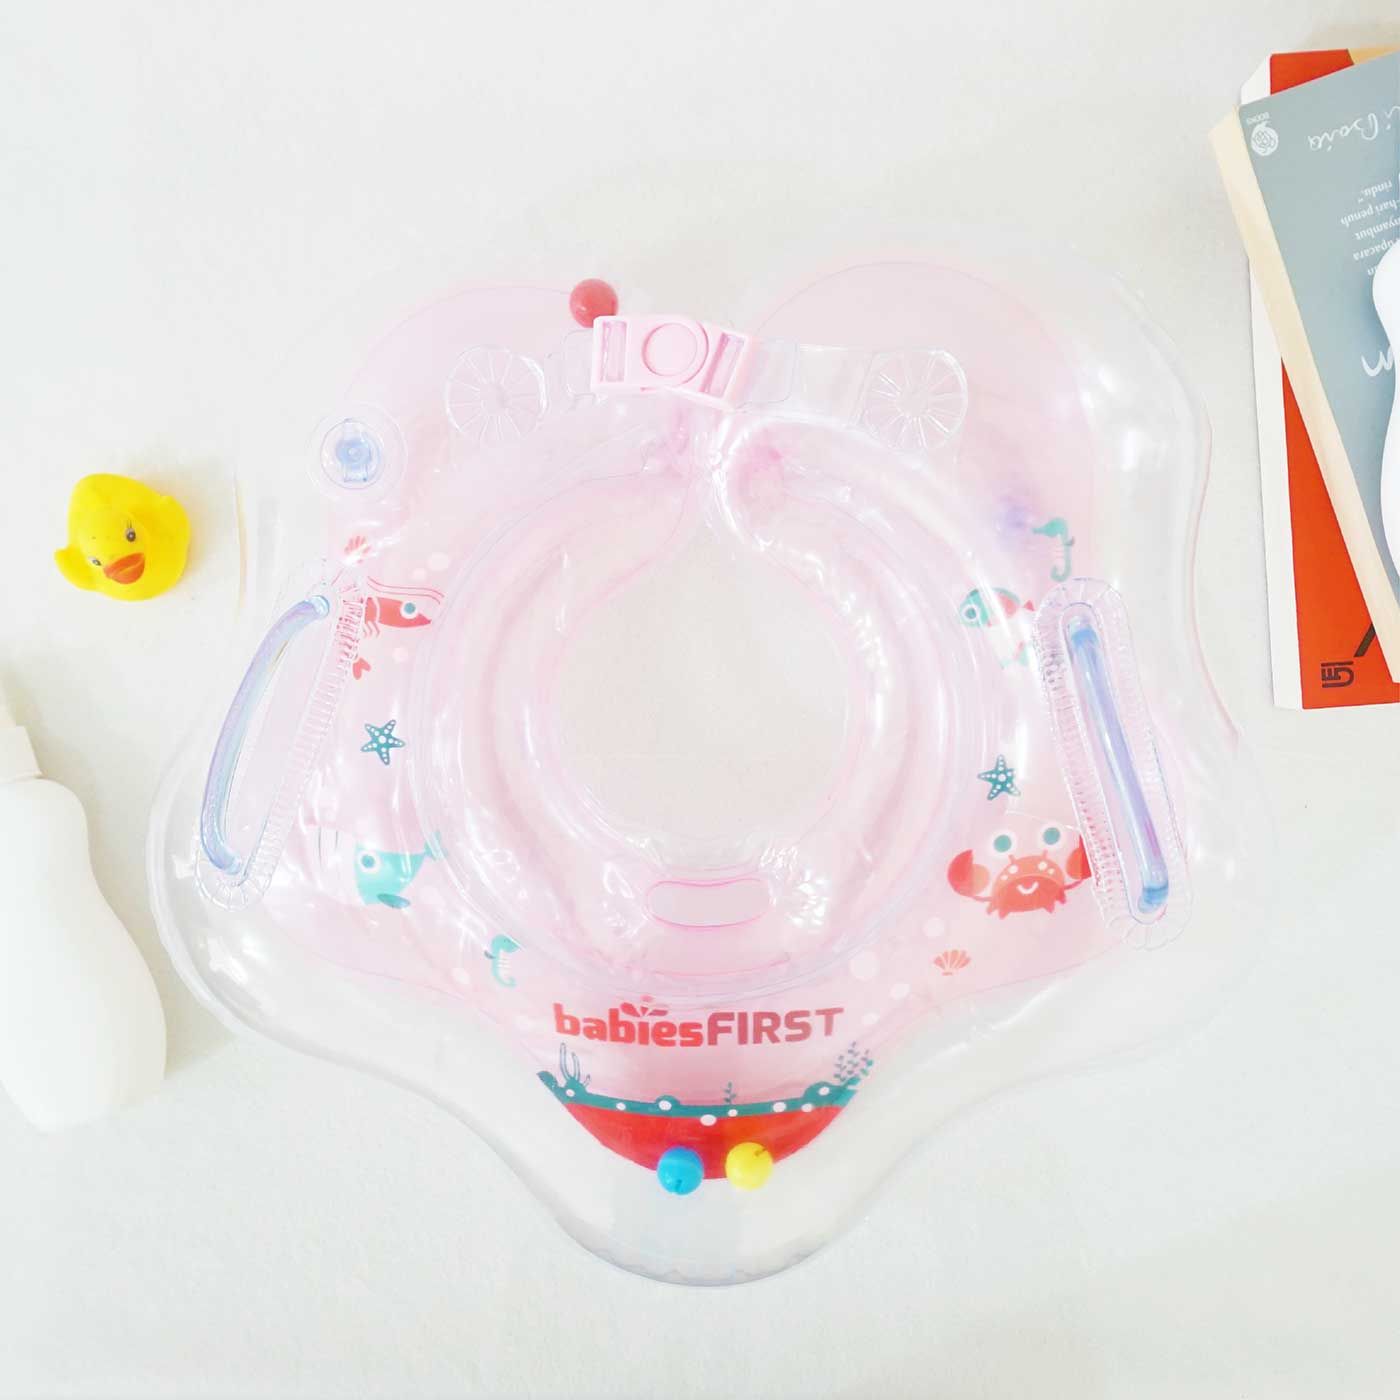 Babiesfirst Inflatable Baby Neck Ring Pink - 3